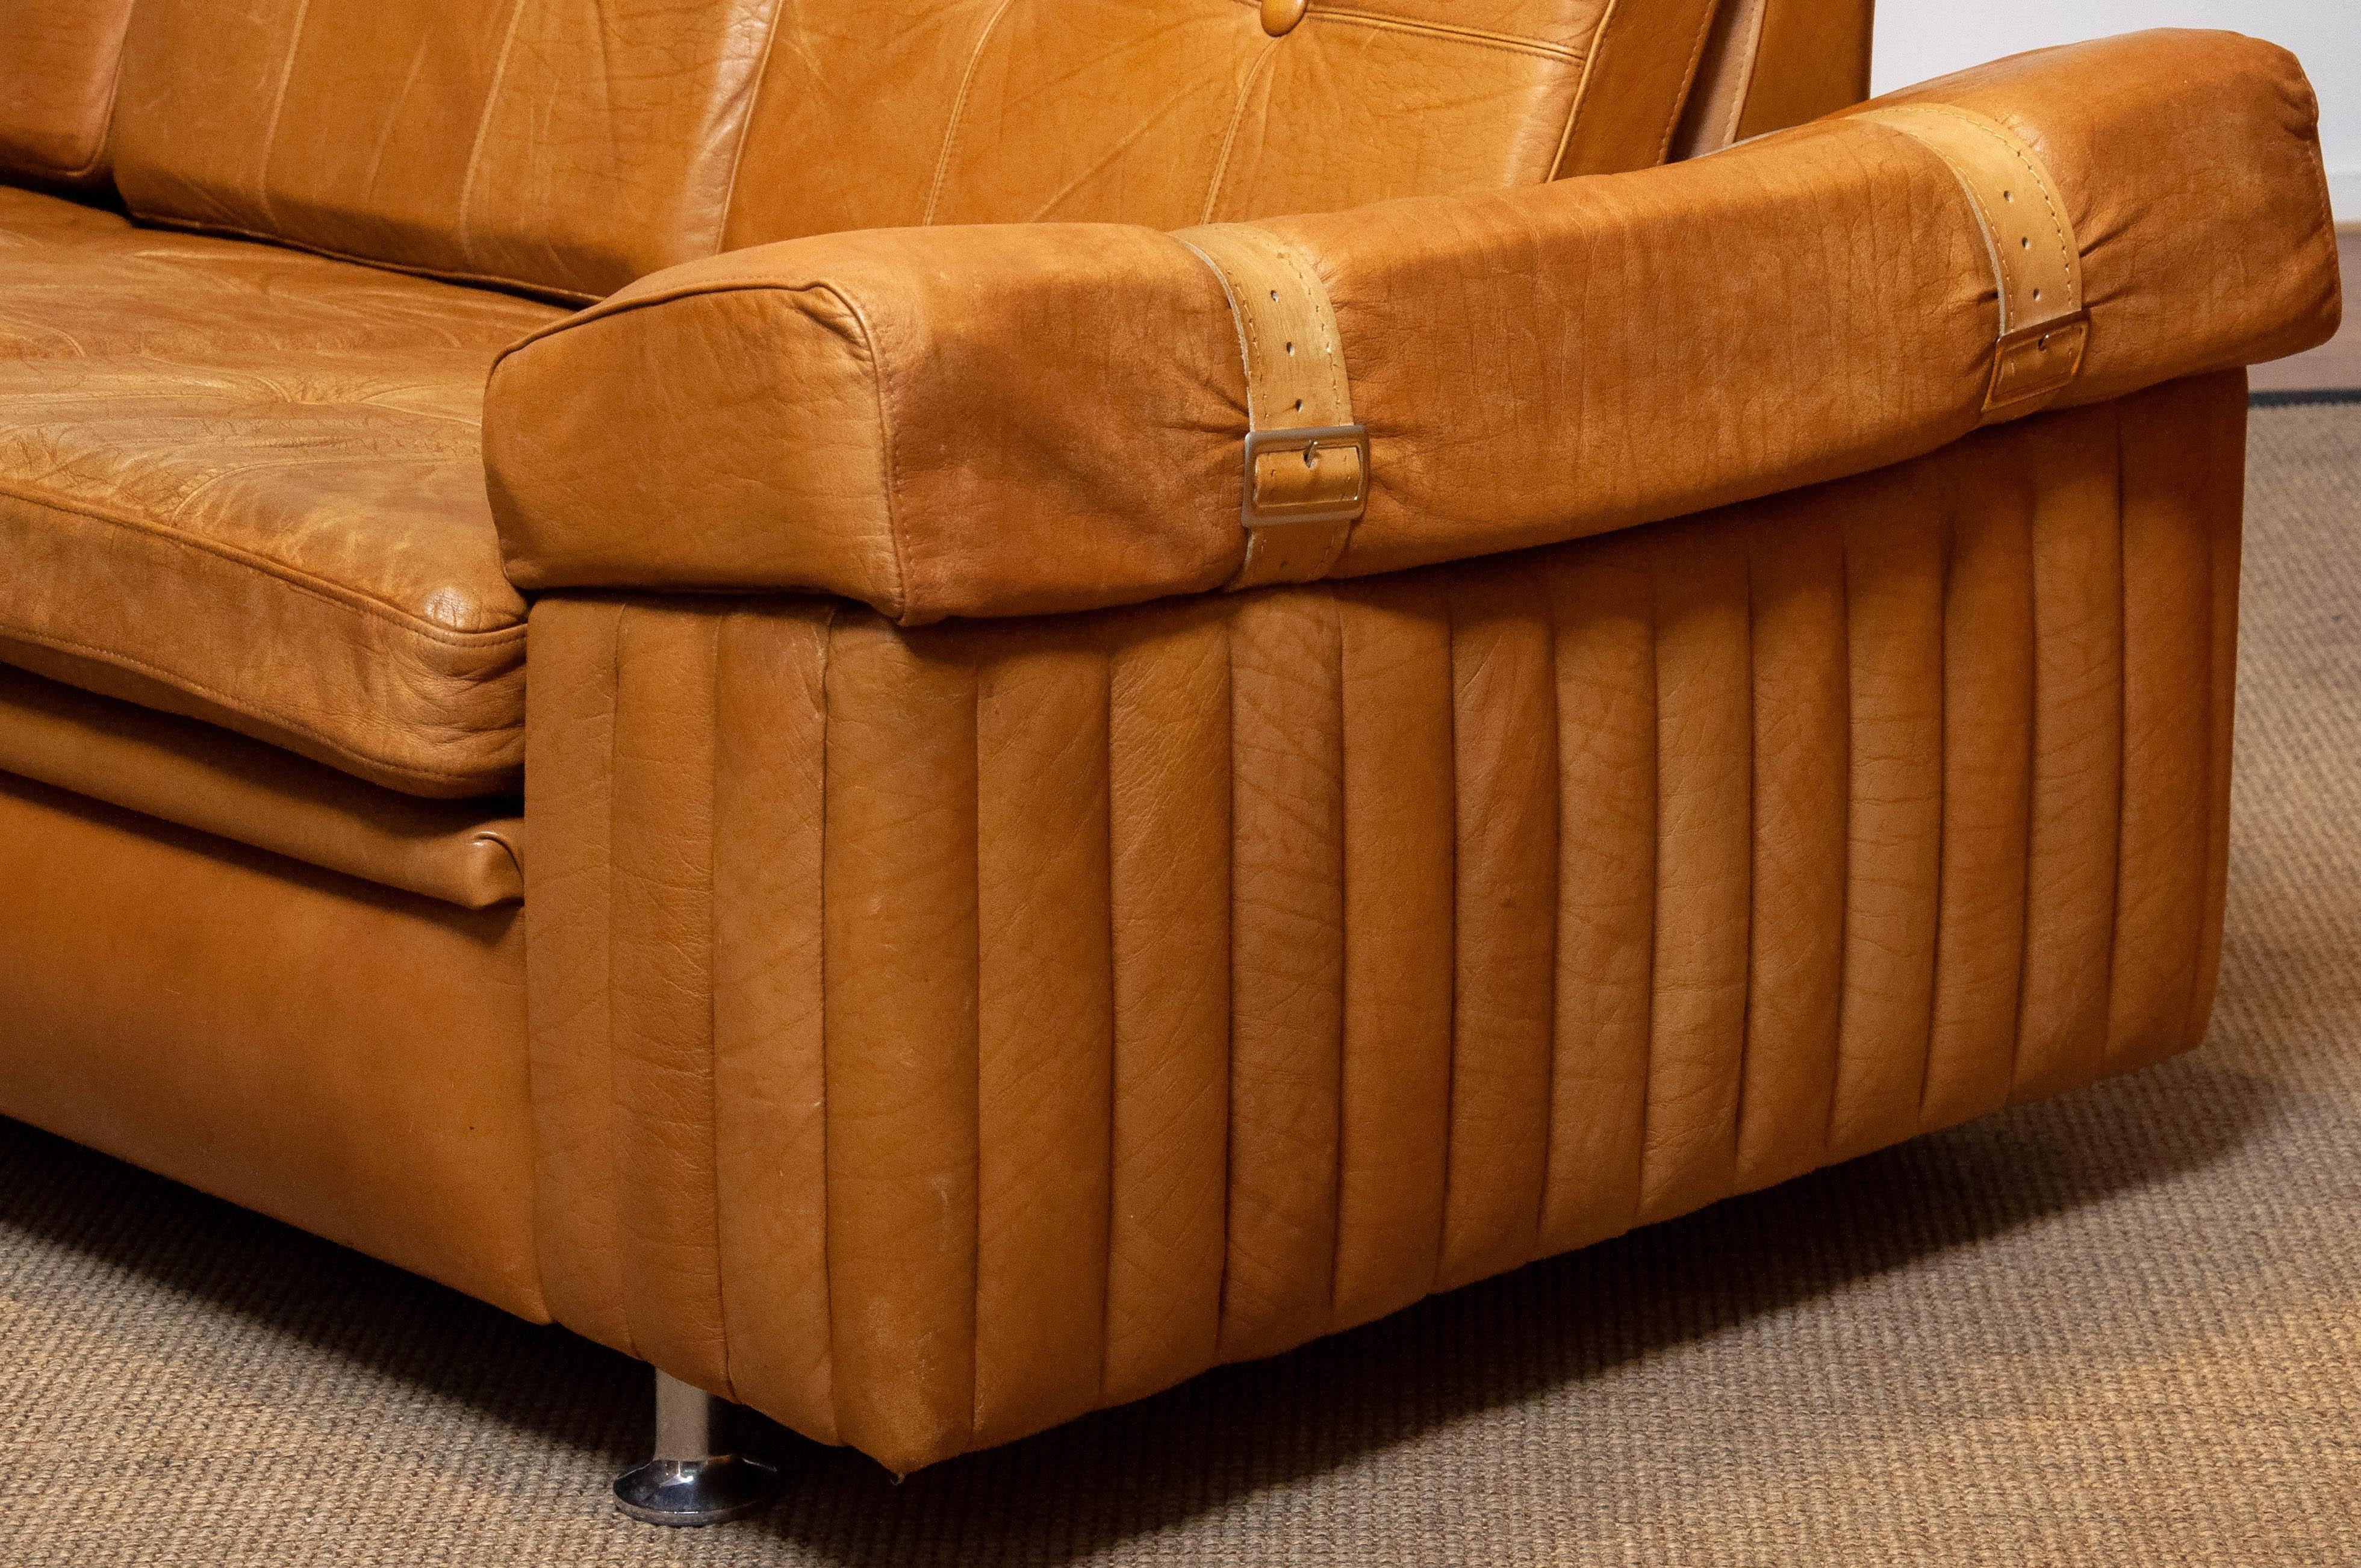 1970s Scandinavian Brutalist Three-Seater Low-Back Sofa in Camel Colored Leather In Good Condition For Sale In Silvolde, Gelderland